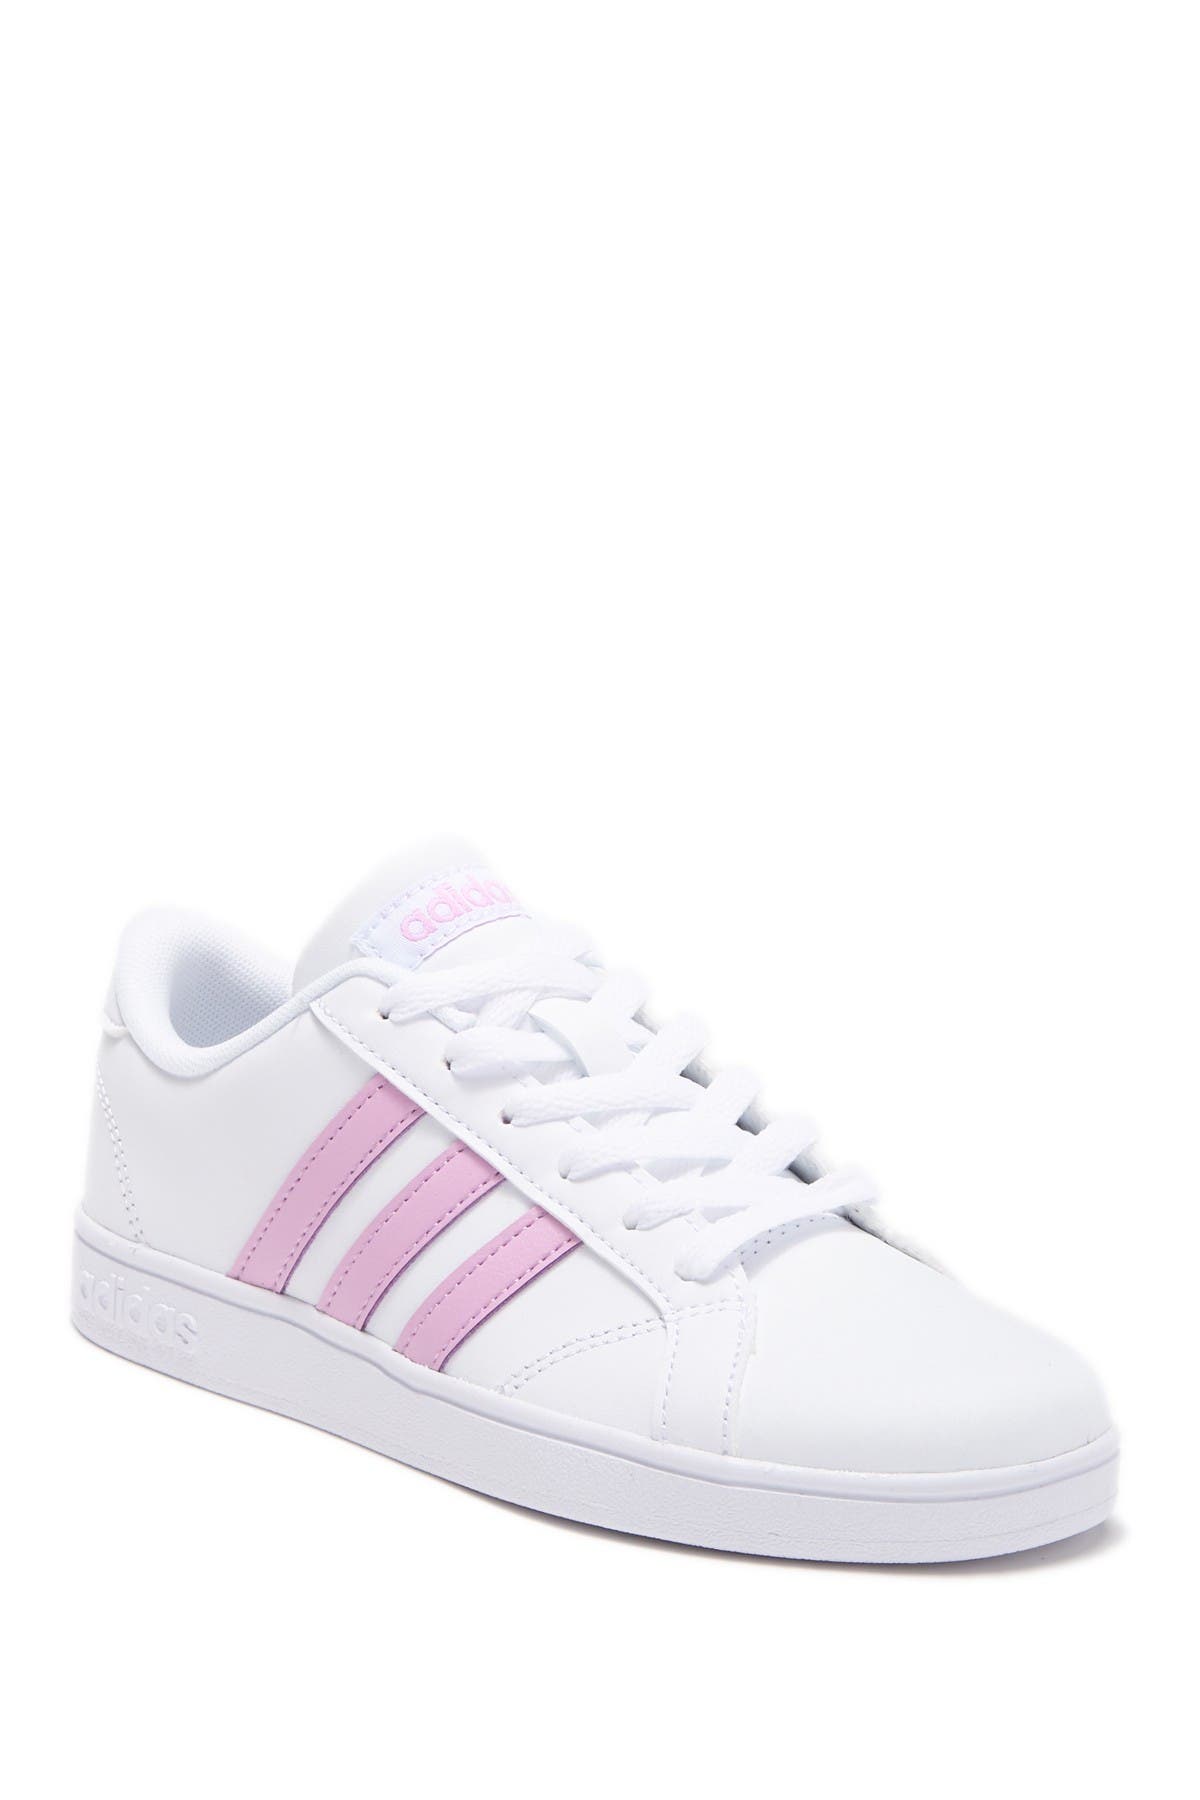 adidas baseline youth sneaker rose gold